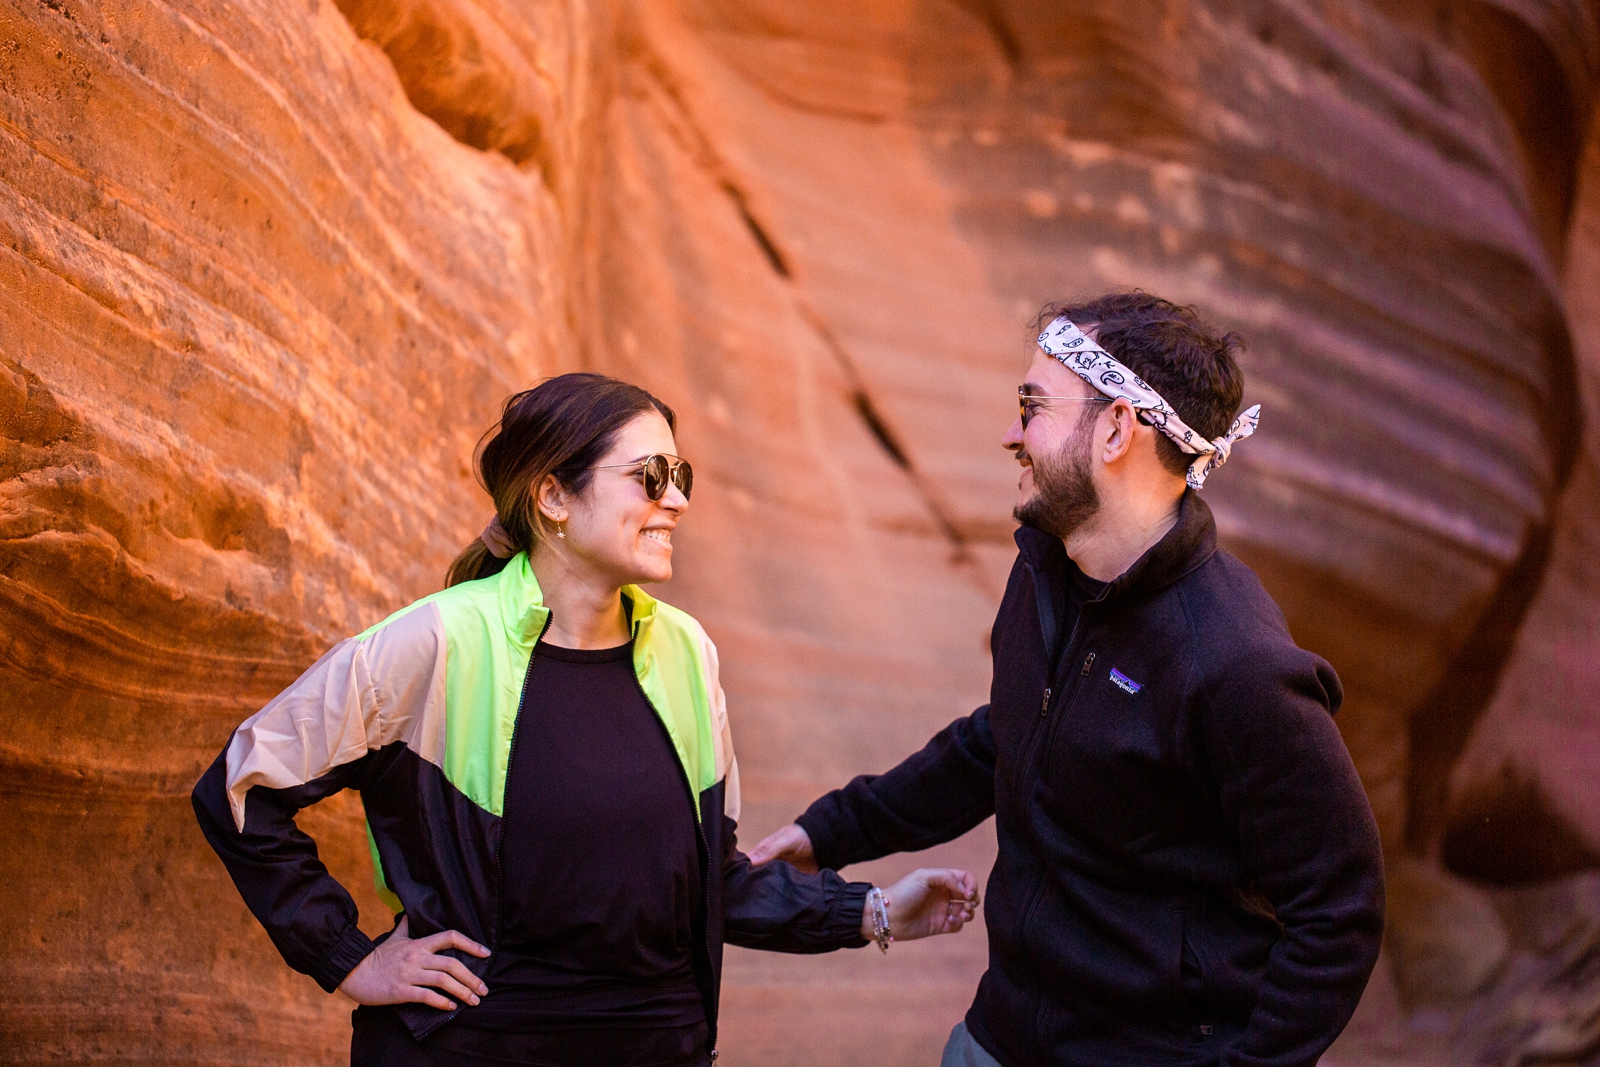 a newly engaged couple posing and smiling at each other for a picture in the Utah Slot Canyon during their adventurous hike